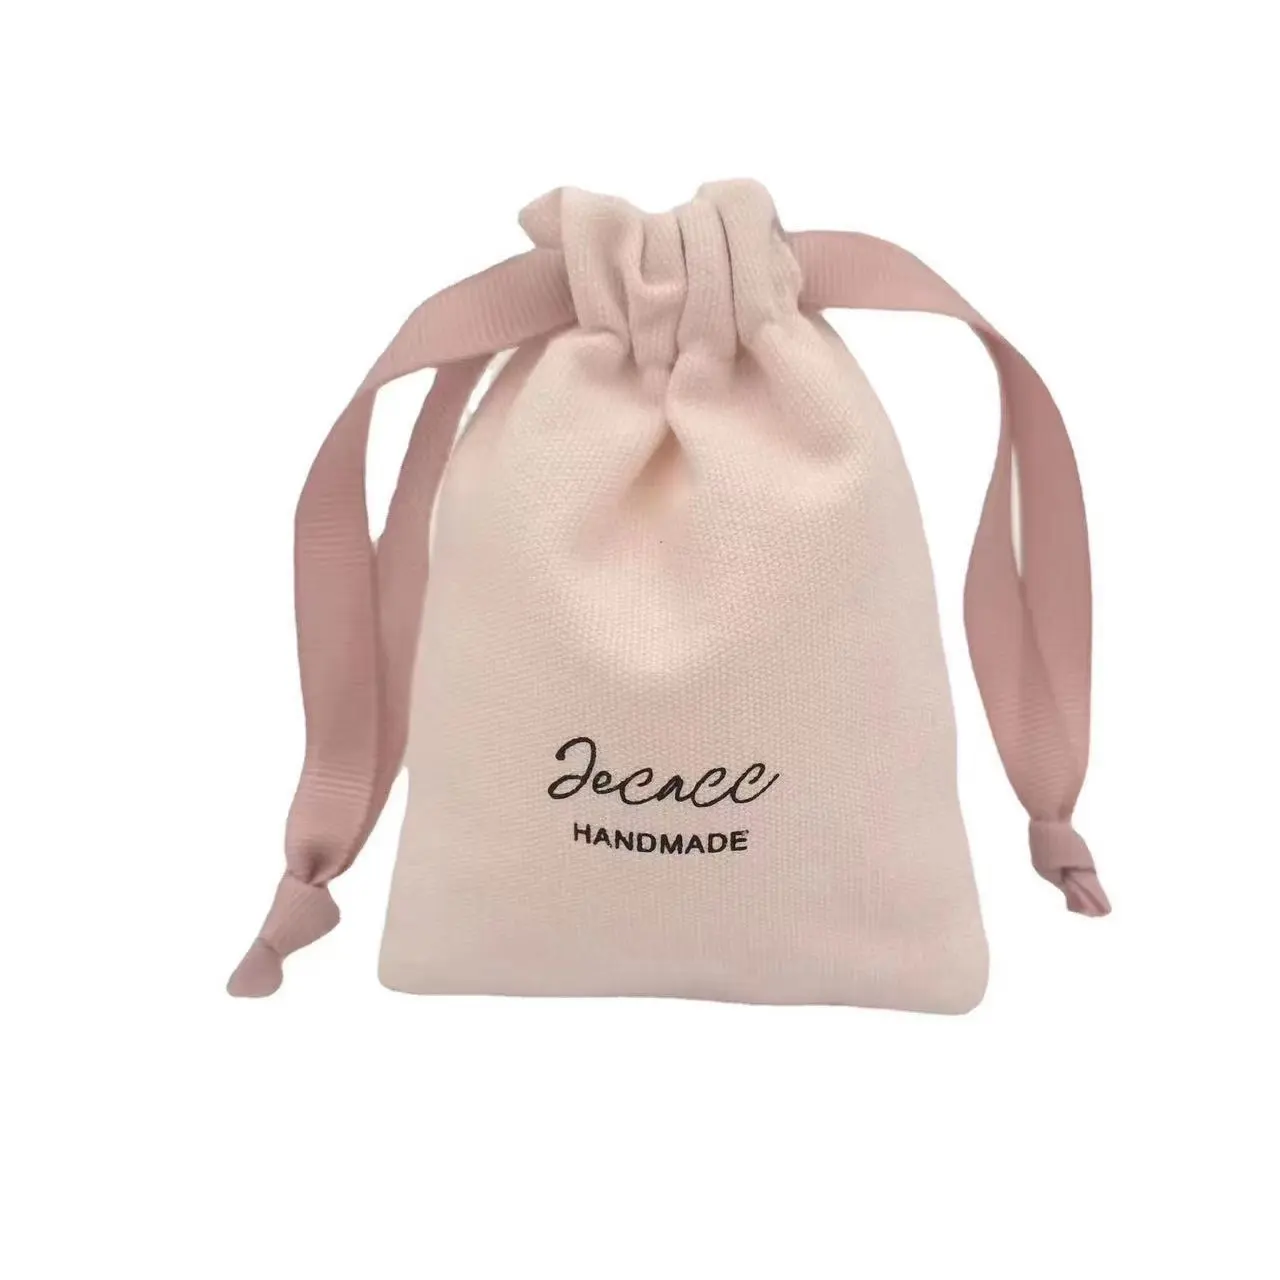 Design High Quality Silk Jewelry Gift Dust Pouch Packaging Drawstring Any Size Satin Bag Velvet Bag